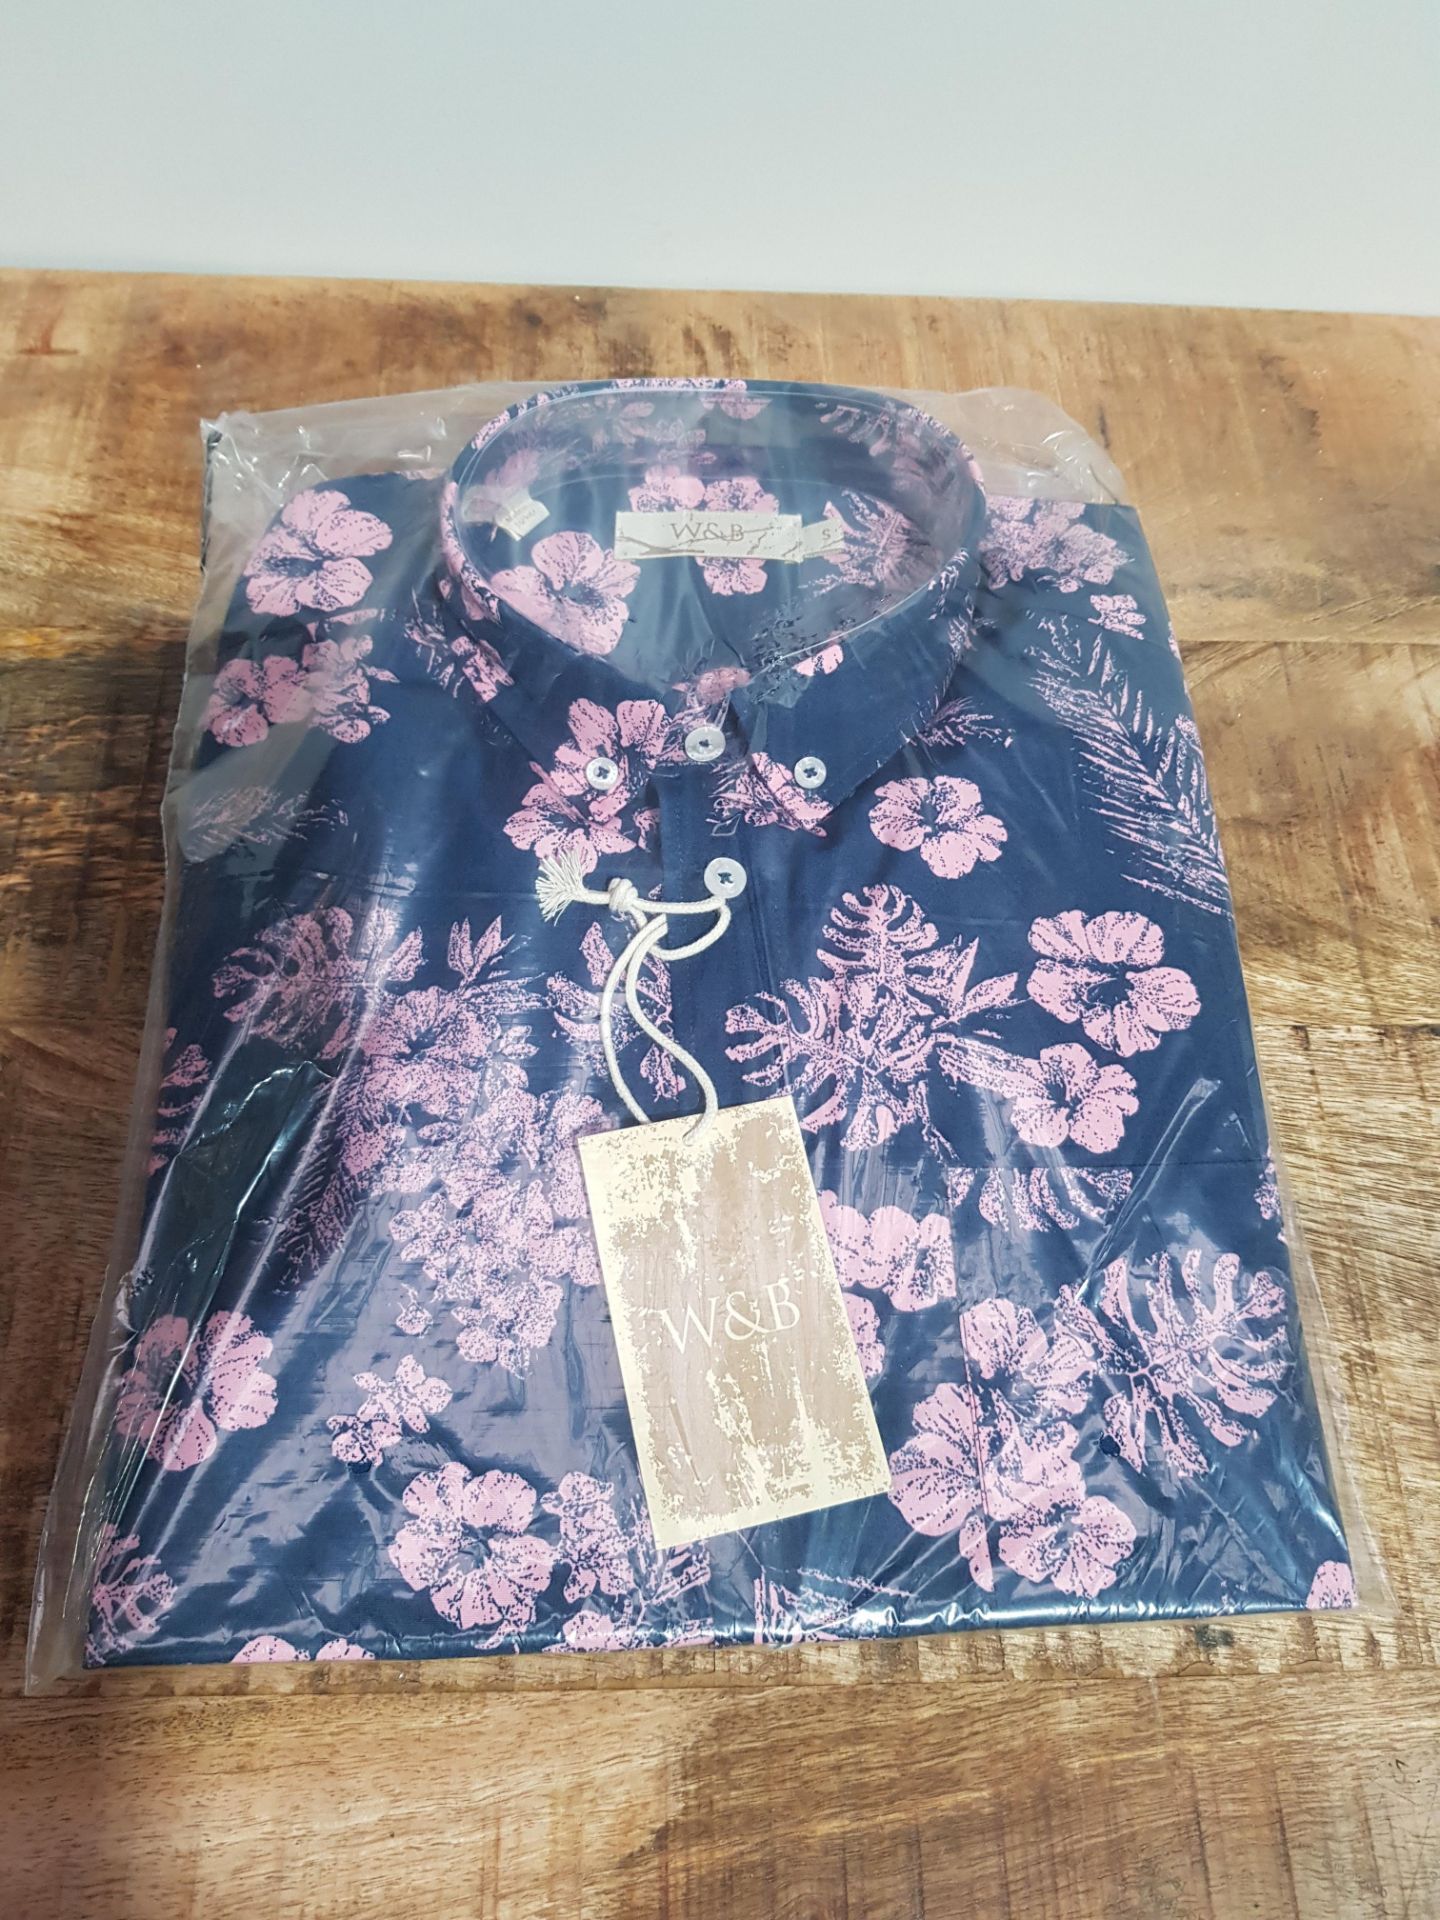 BRAND NEW WILLIAMS & BROWN FLORAL SHIRT SIZE SMALL (AU120)Condition ReportBRAND NEW